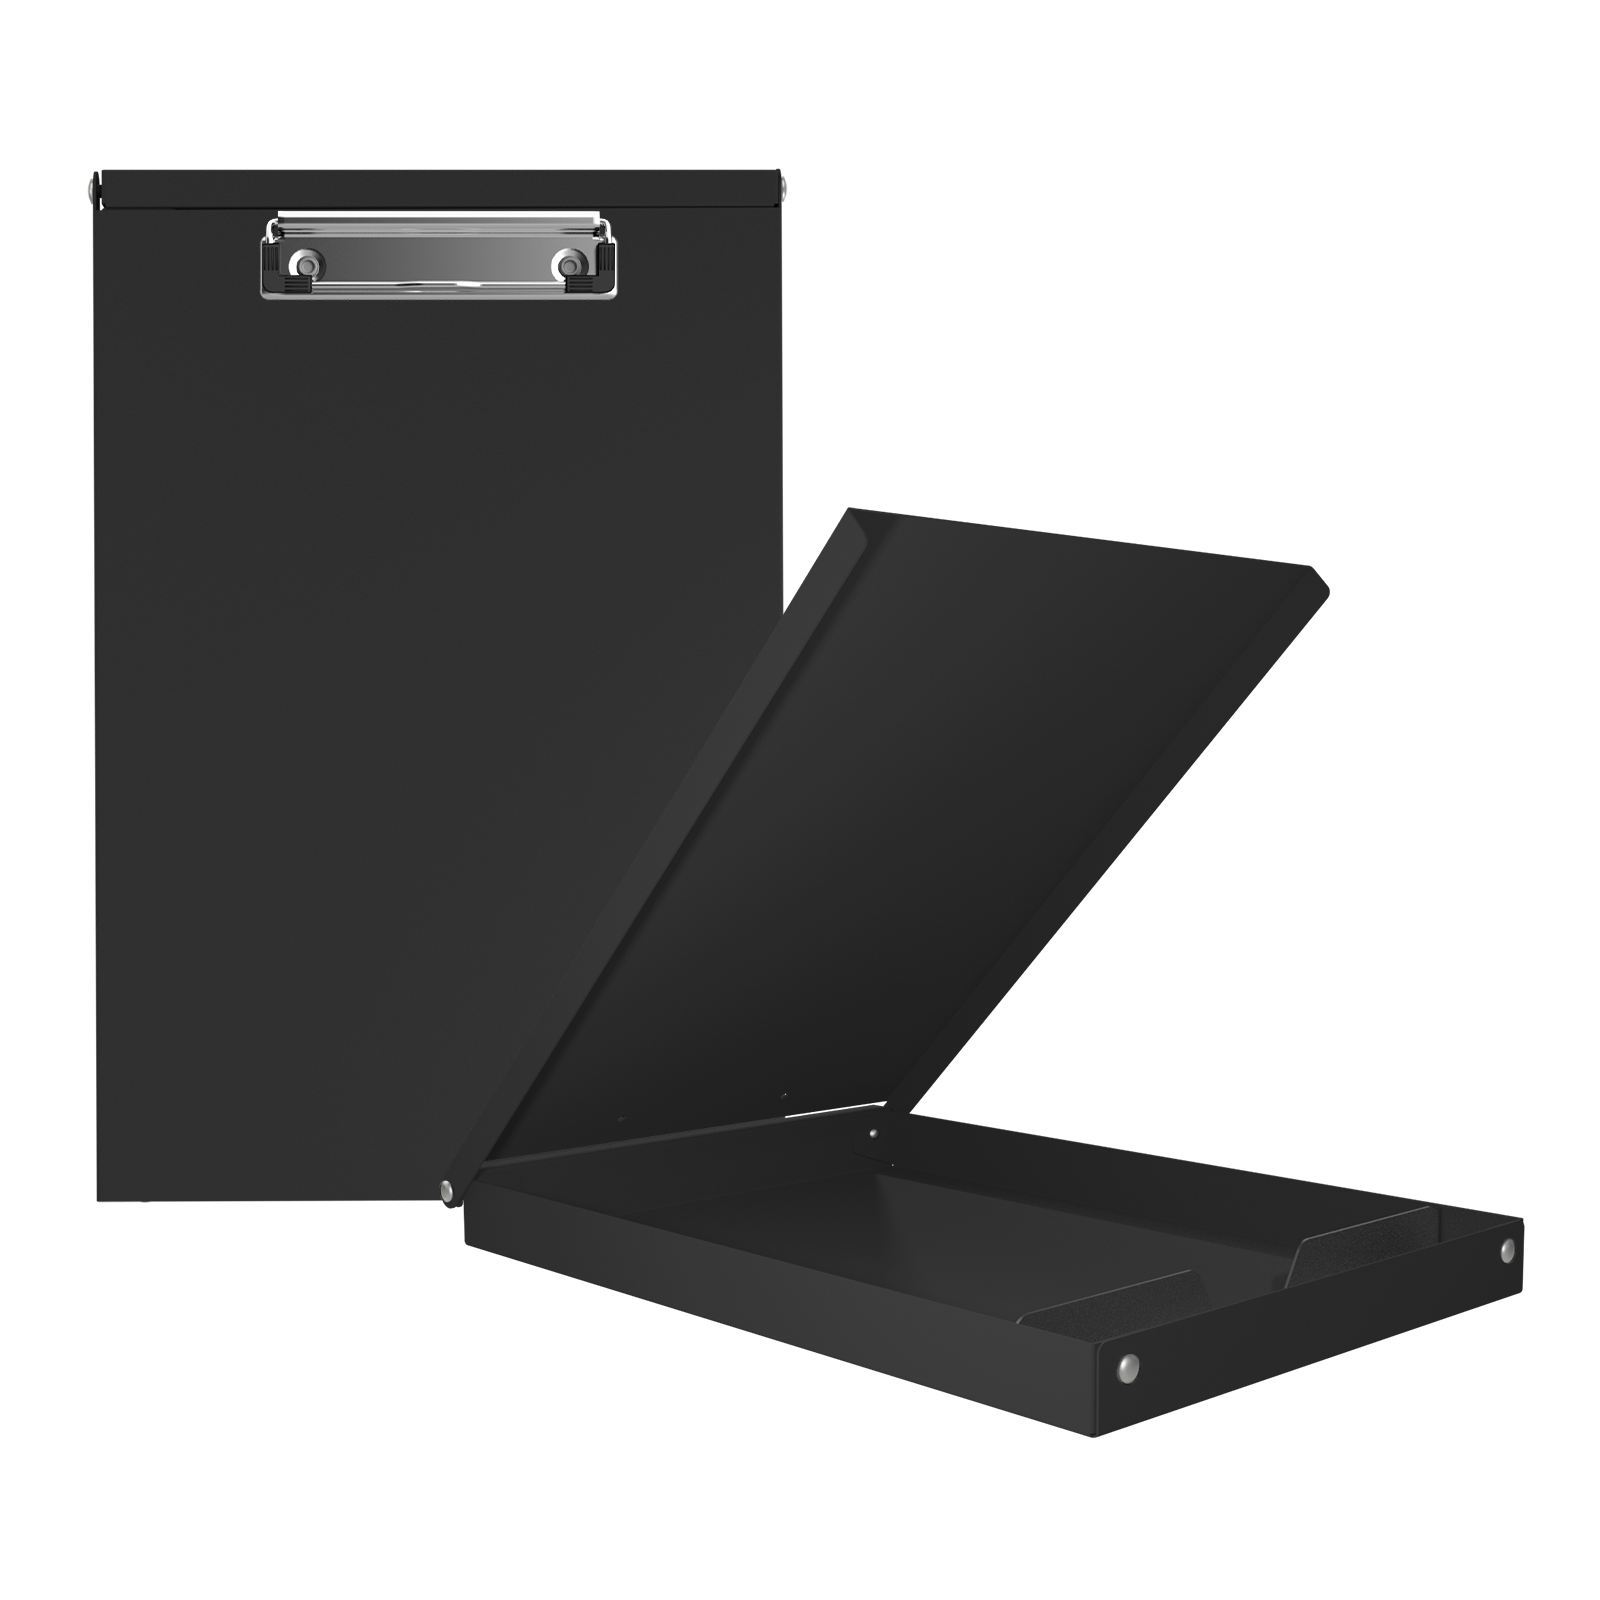 Office Depot Brand Removable Pen Holders For Clipboards 1 H x 1 W